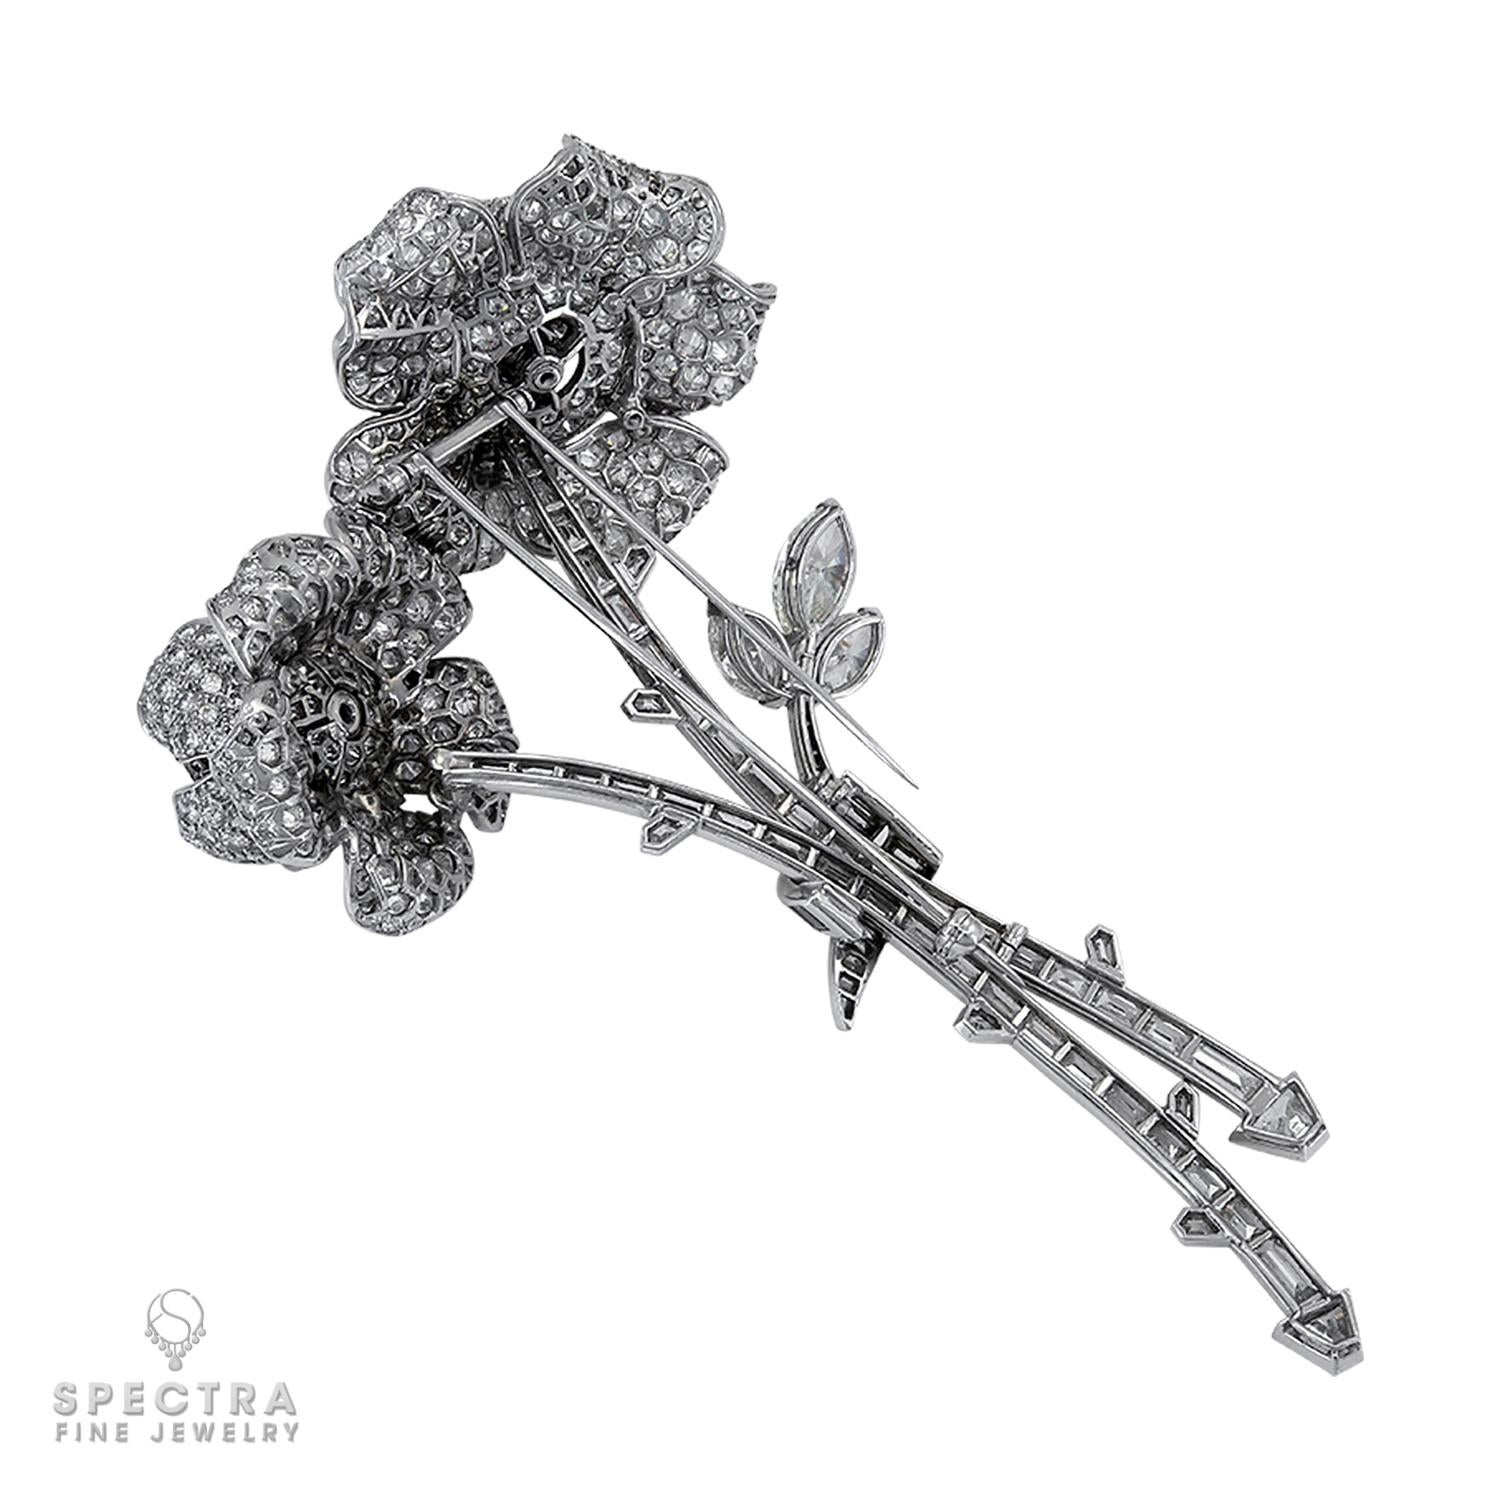 Magnificent flower brooch embellished with diamonds and made in platinum.
Designed as two flowers set 